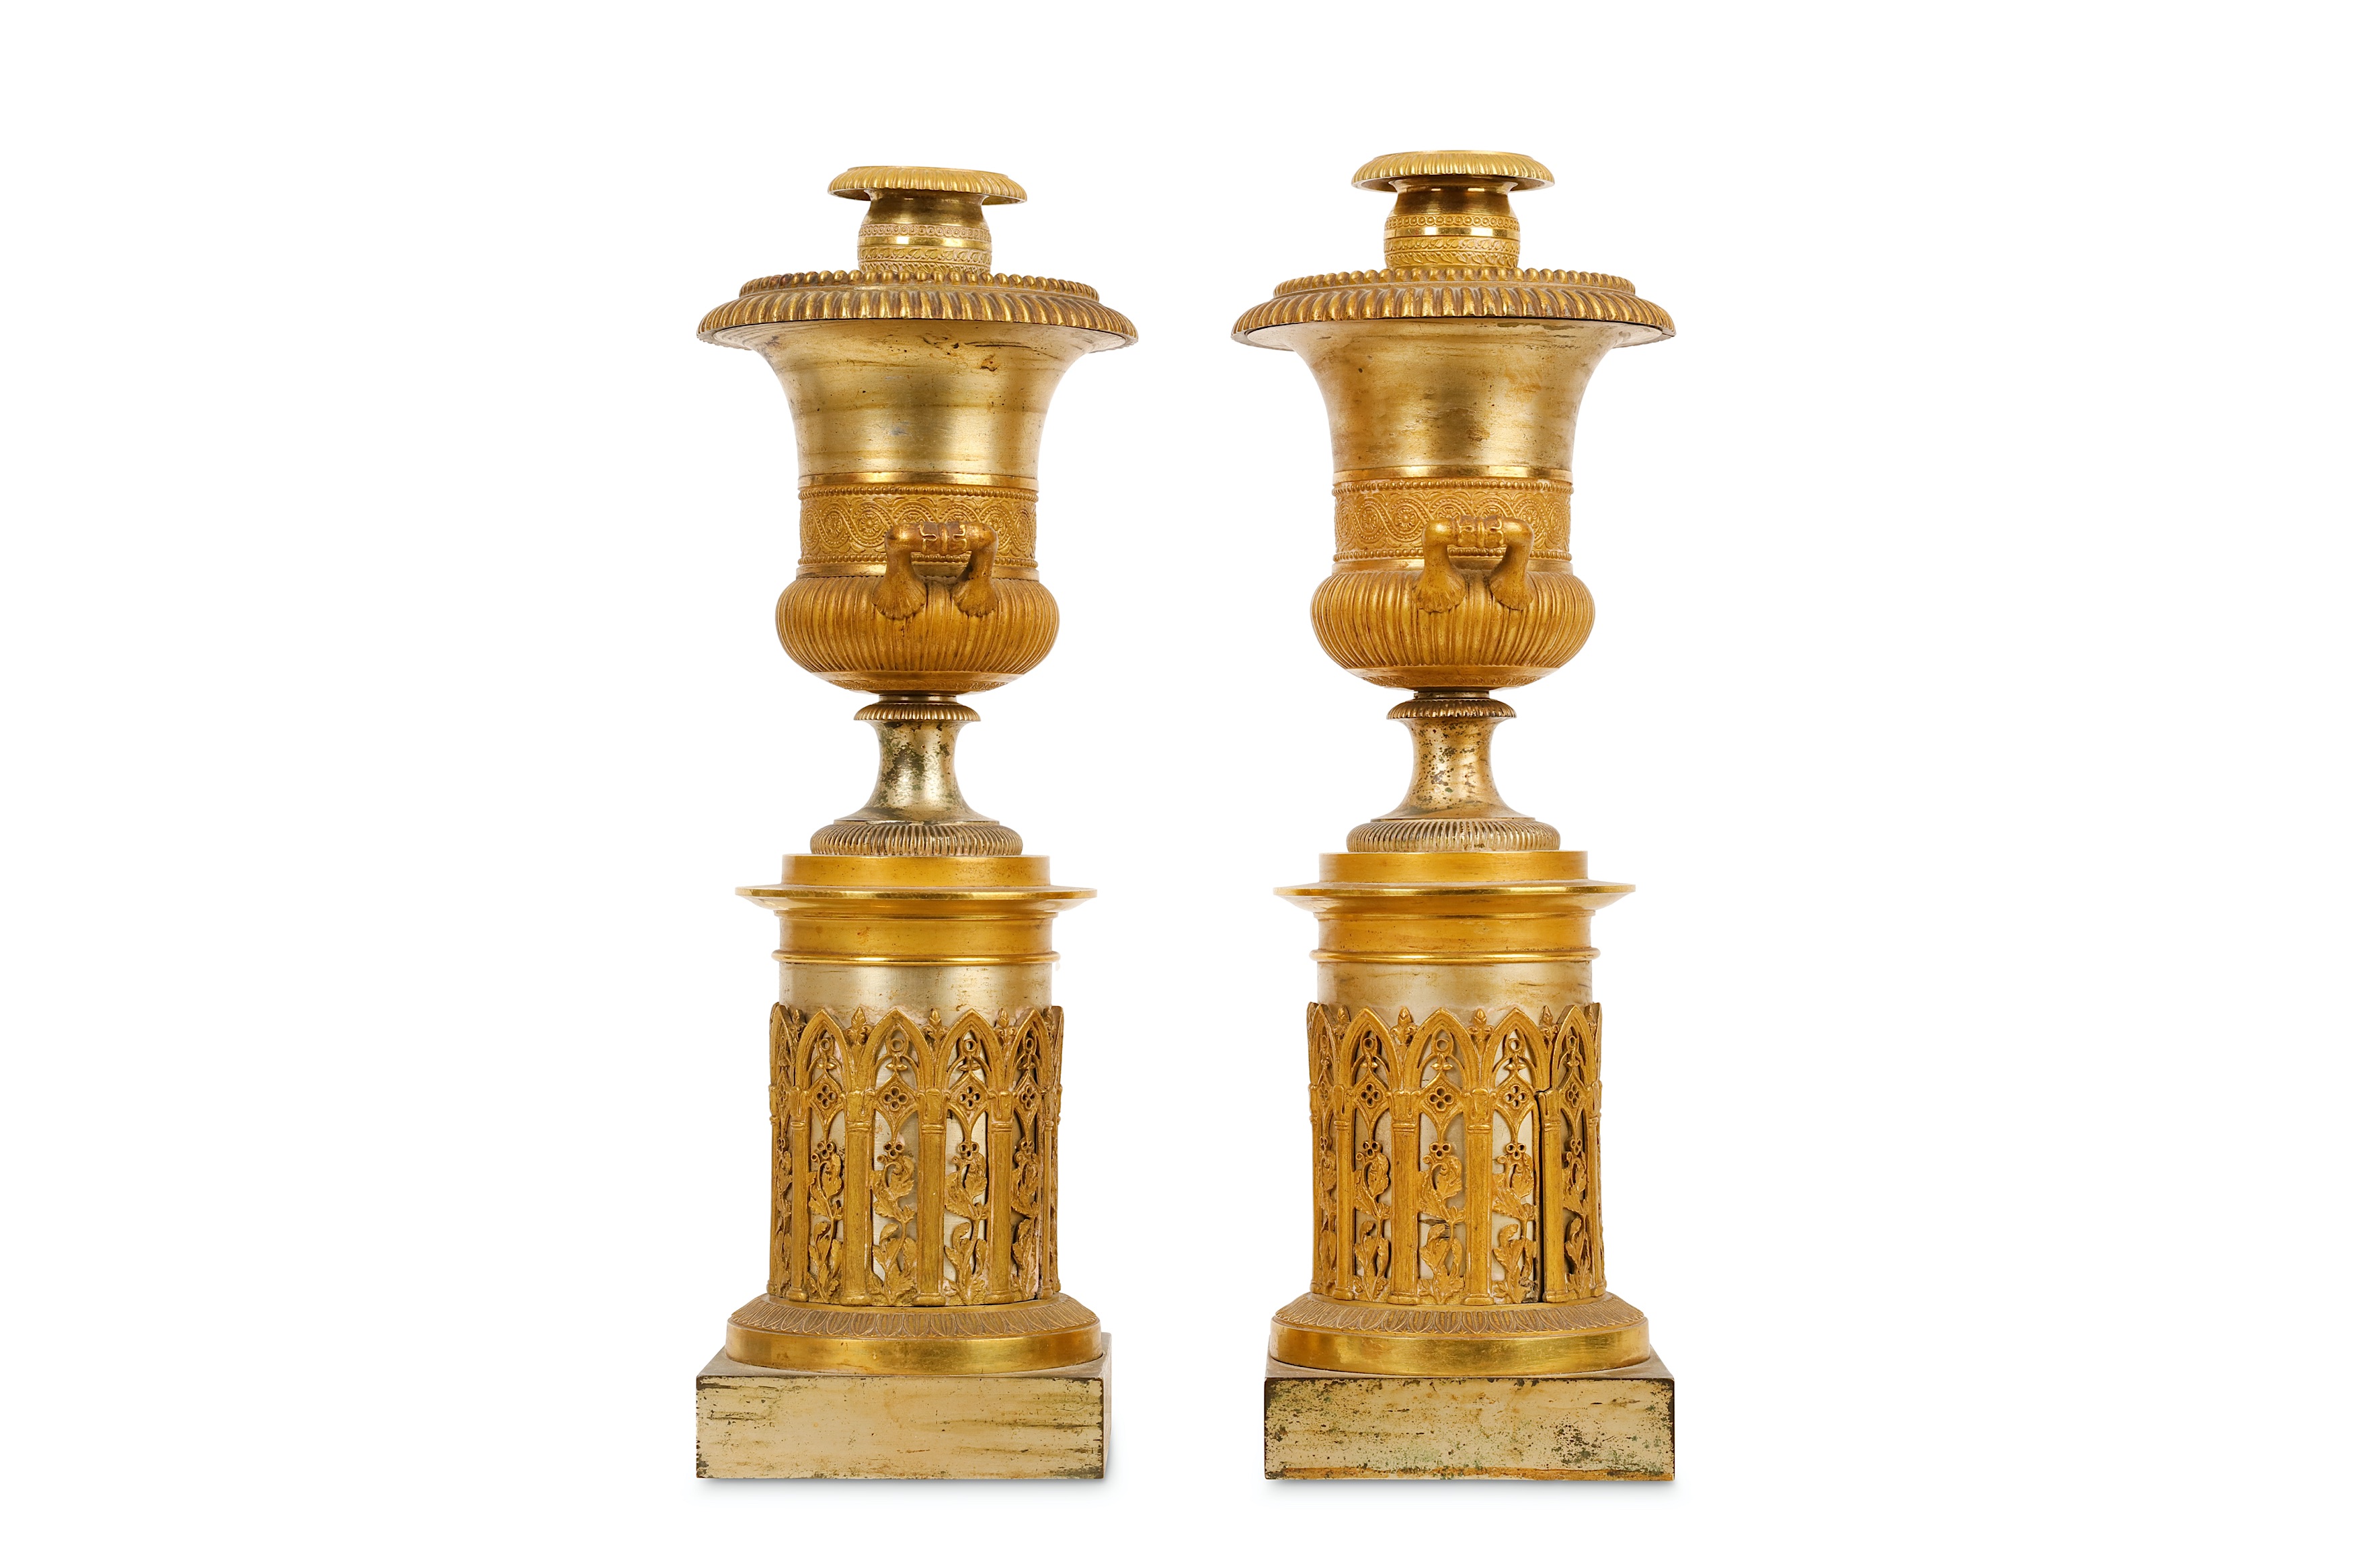 A PAIR OF SECOND QUARTER 19TH CENTURY FRENCH GILT AND SILVERED BRONZE CANDLESTICKS FORMED AS URNS - Image 2 of 5